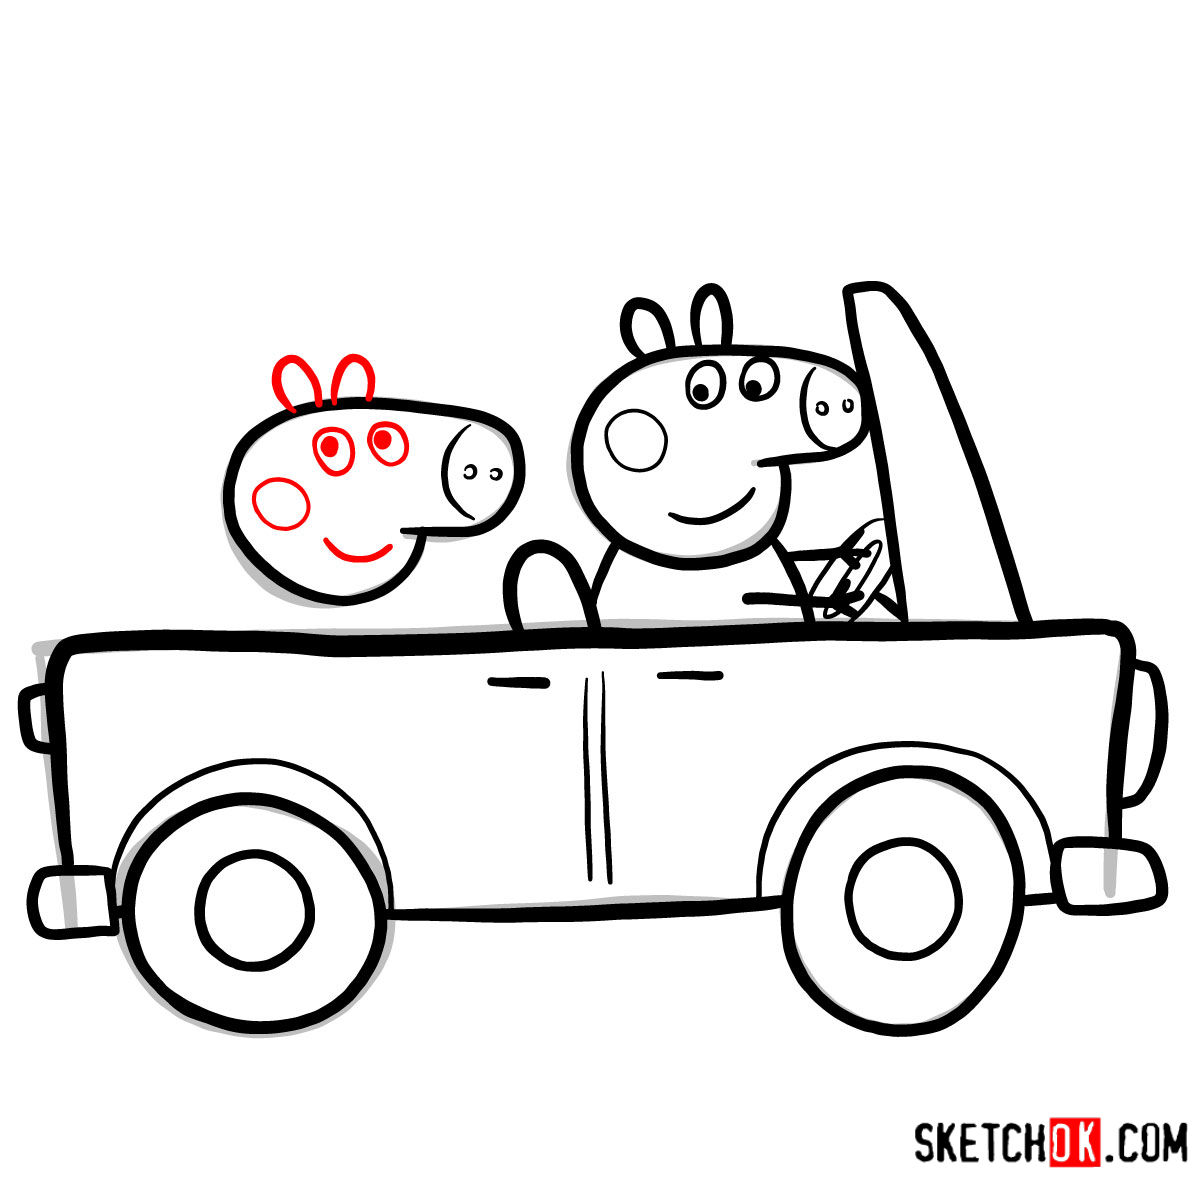 How to draw George Pig with Mummy Pig riding a car - step 10